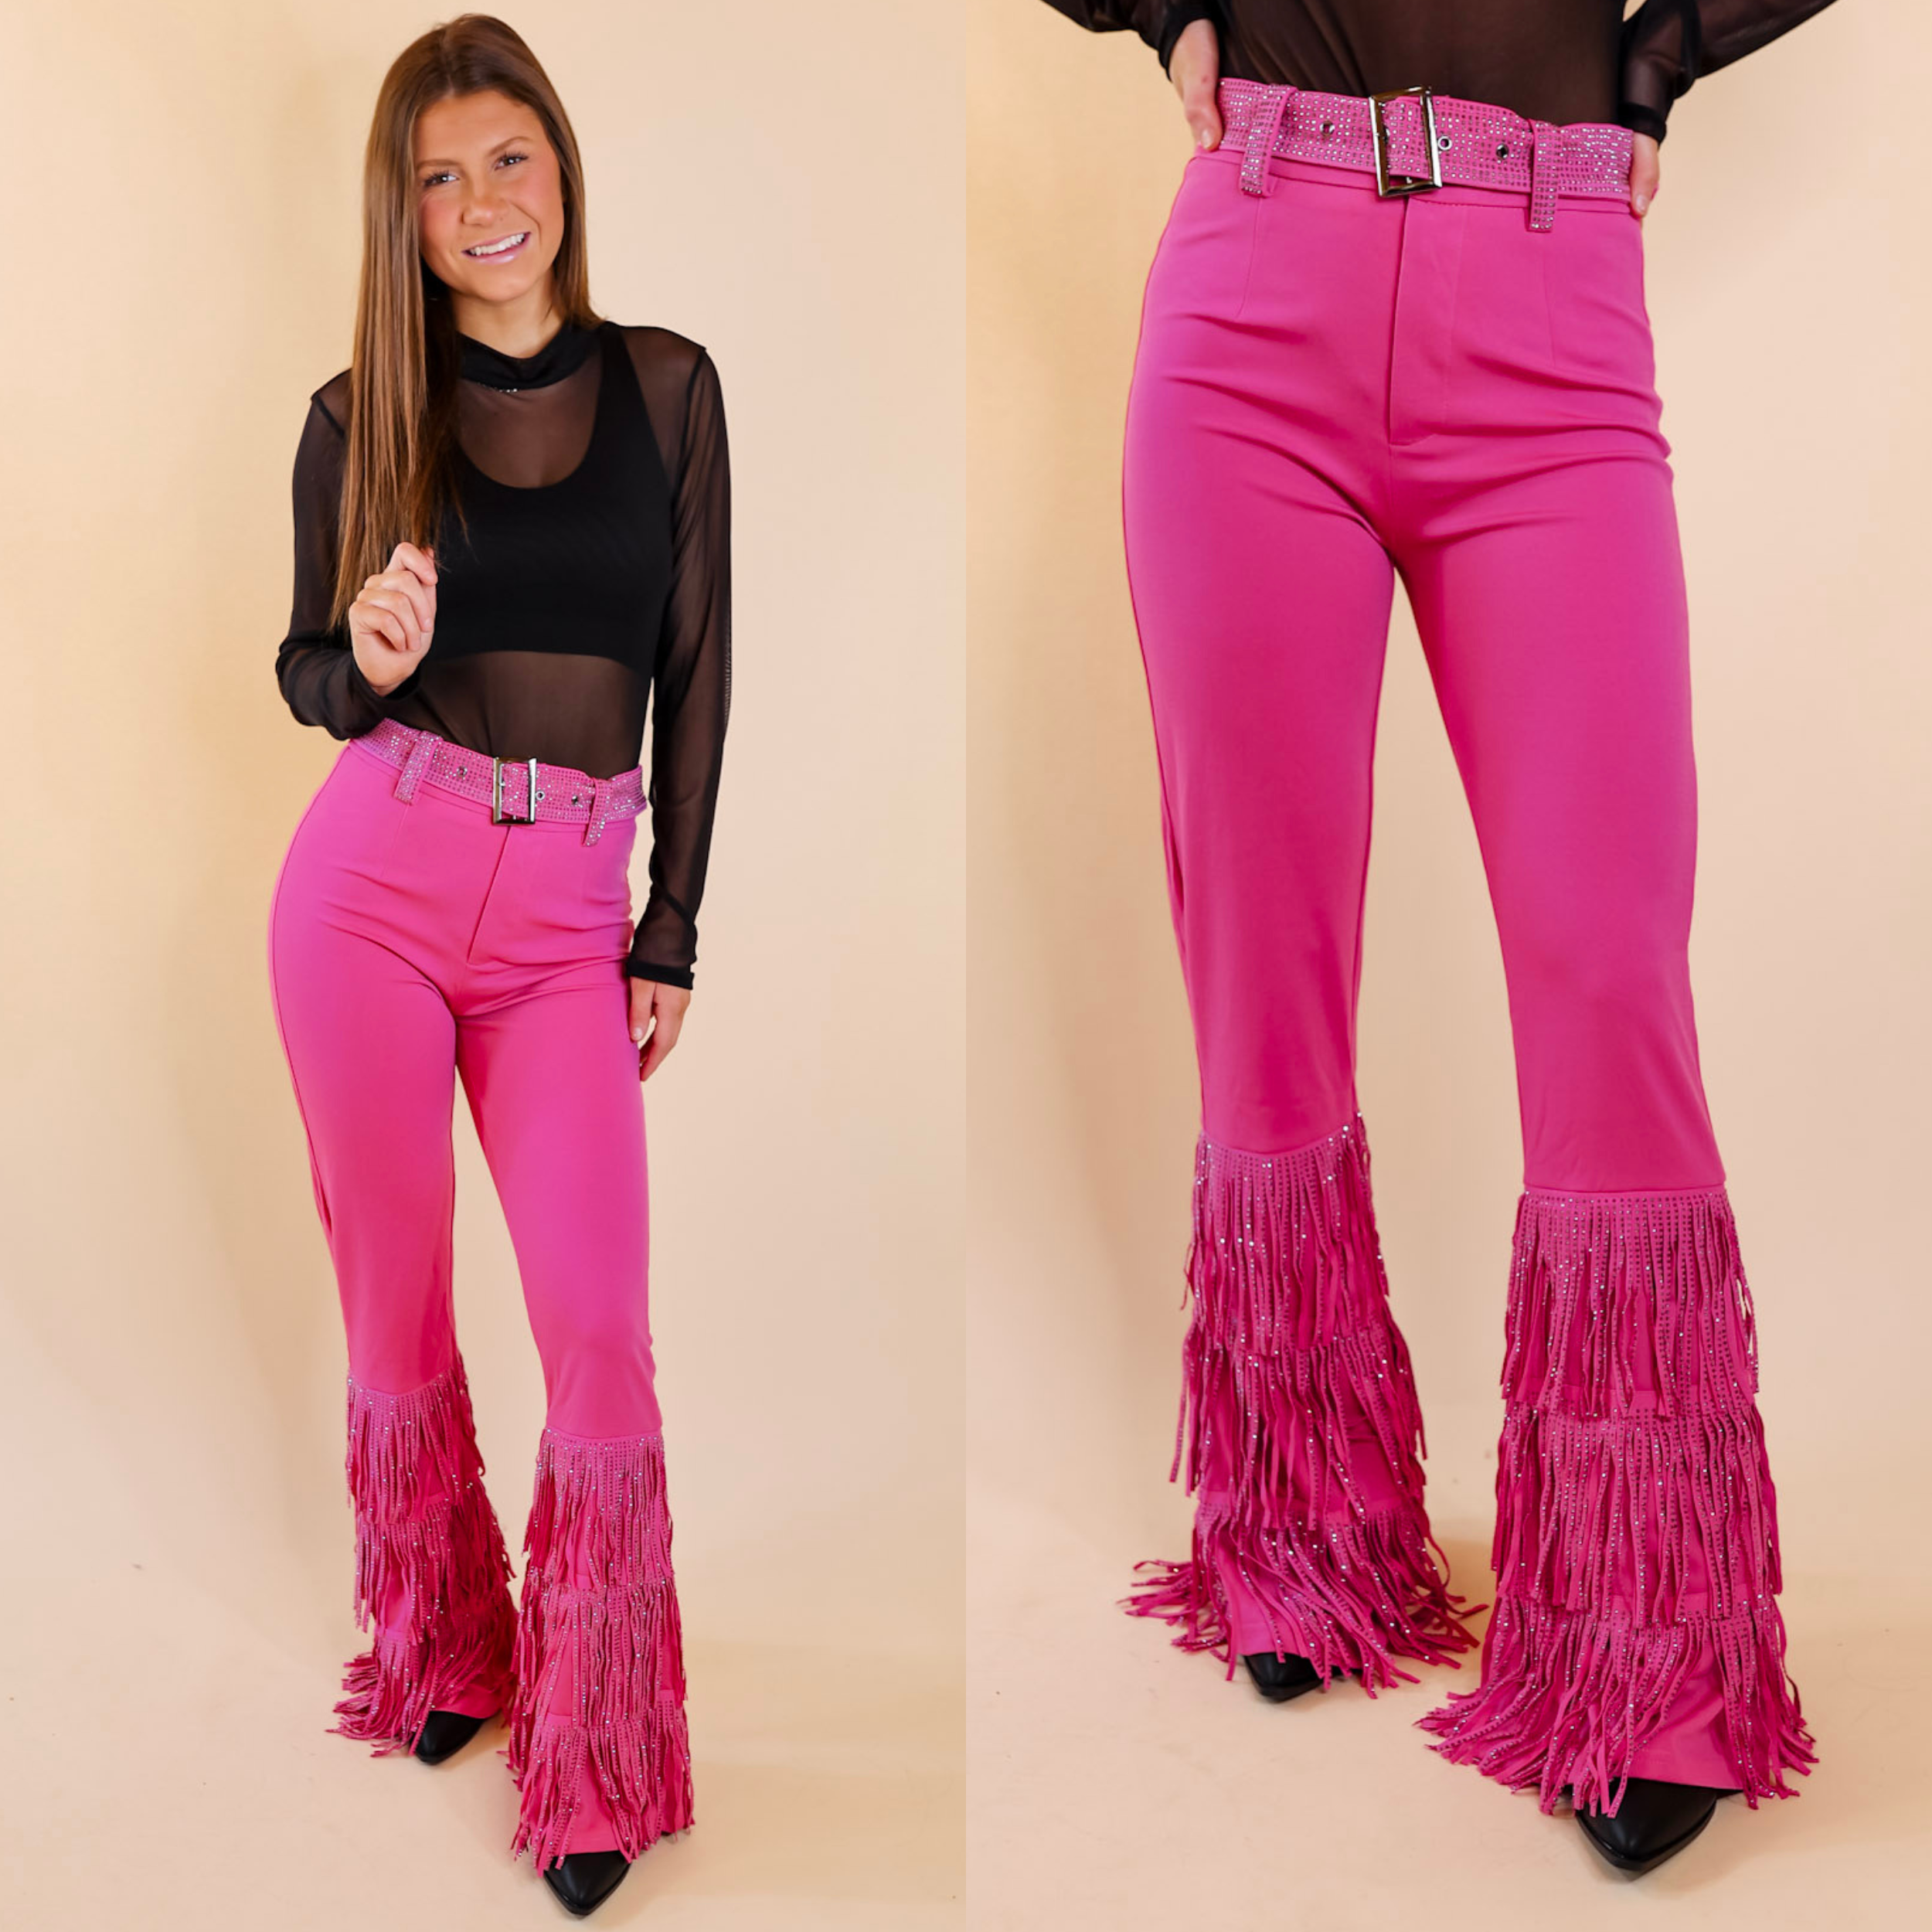 Hot Pink High Waisted Flare Pants – The ZigZag Stripe